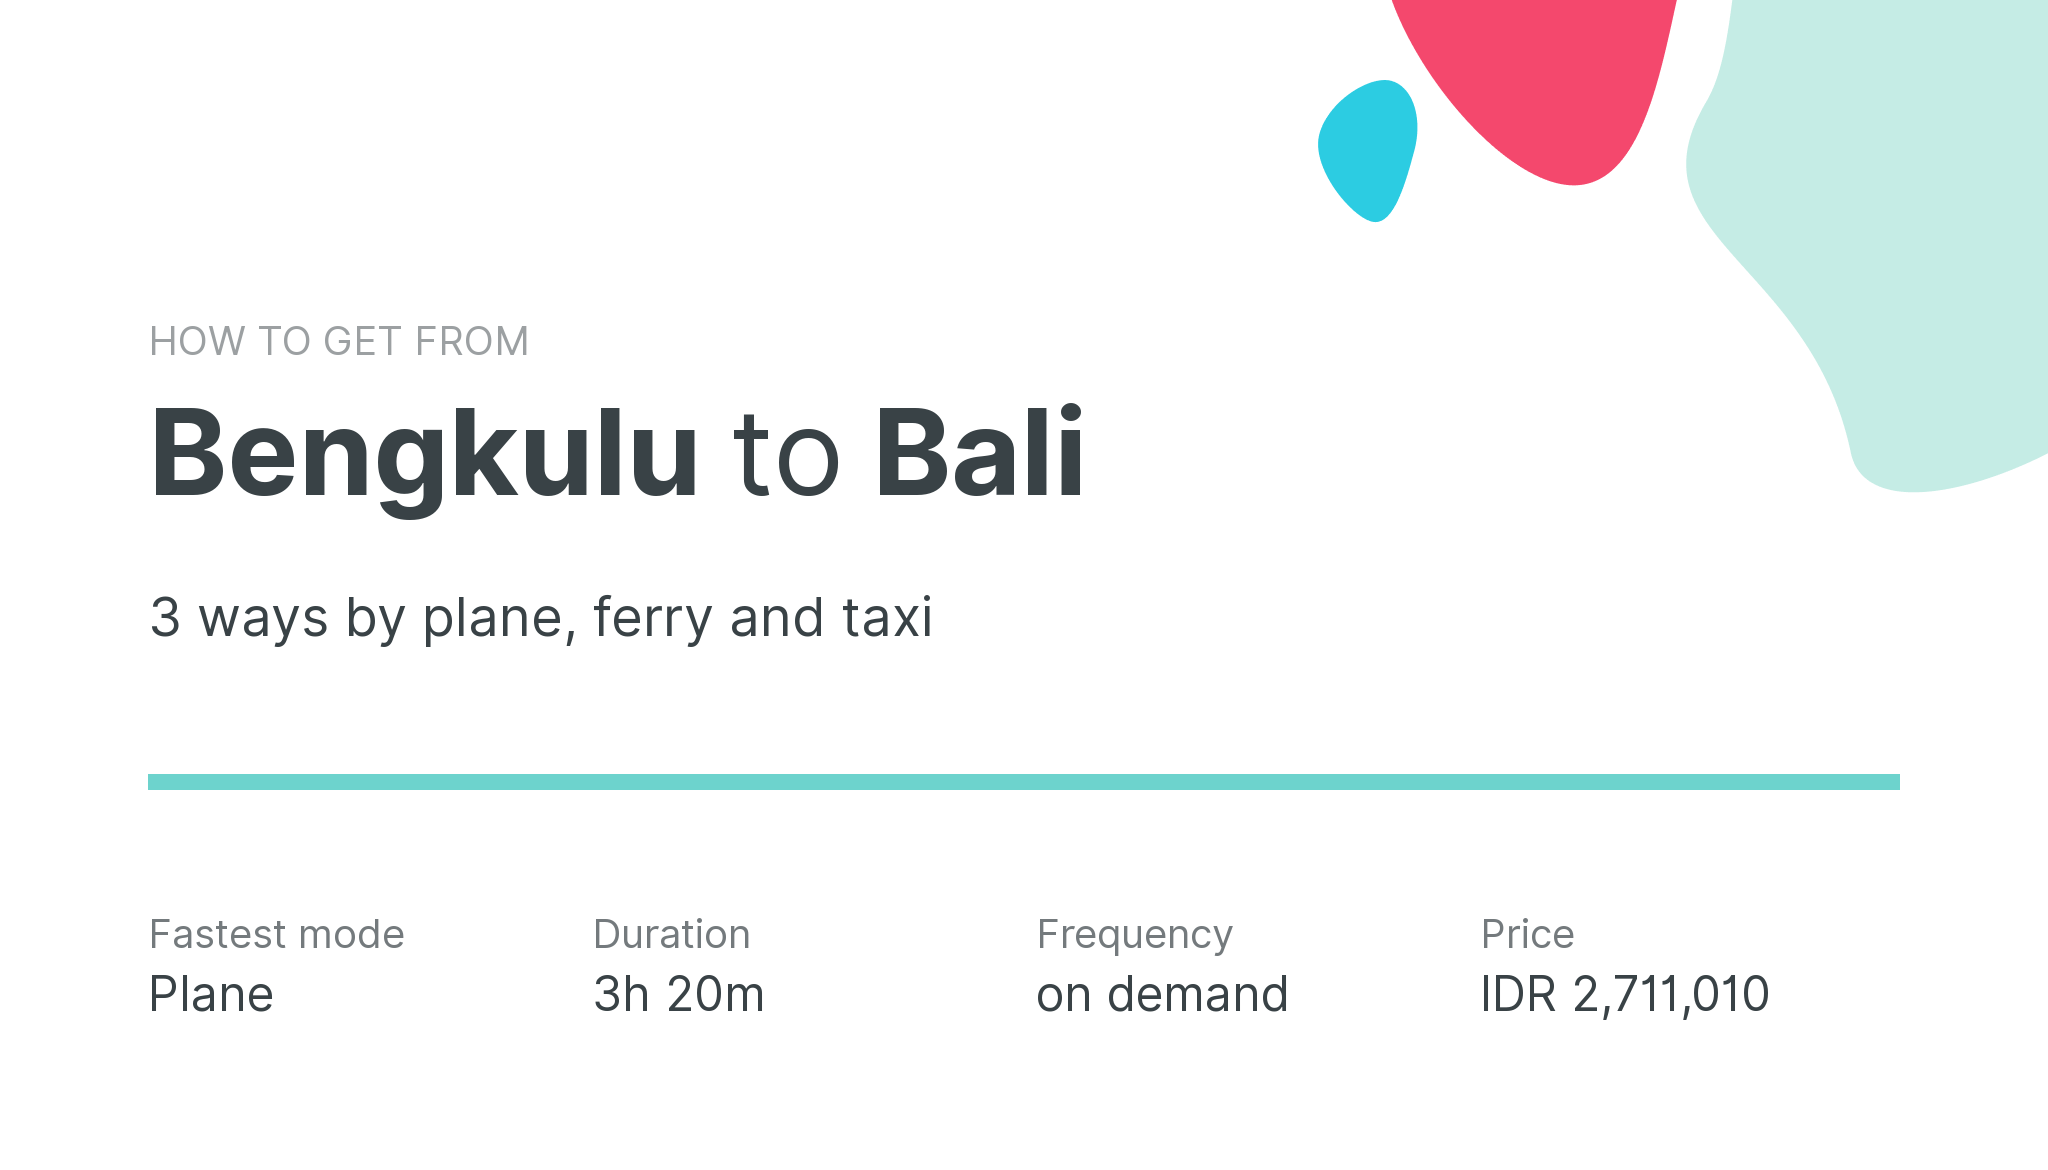 How do I get from Bengkulu to Bali